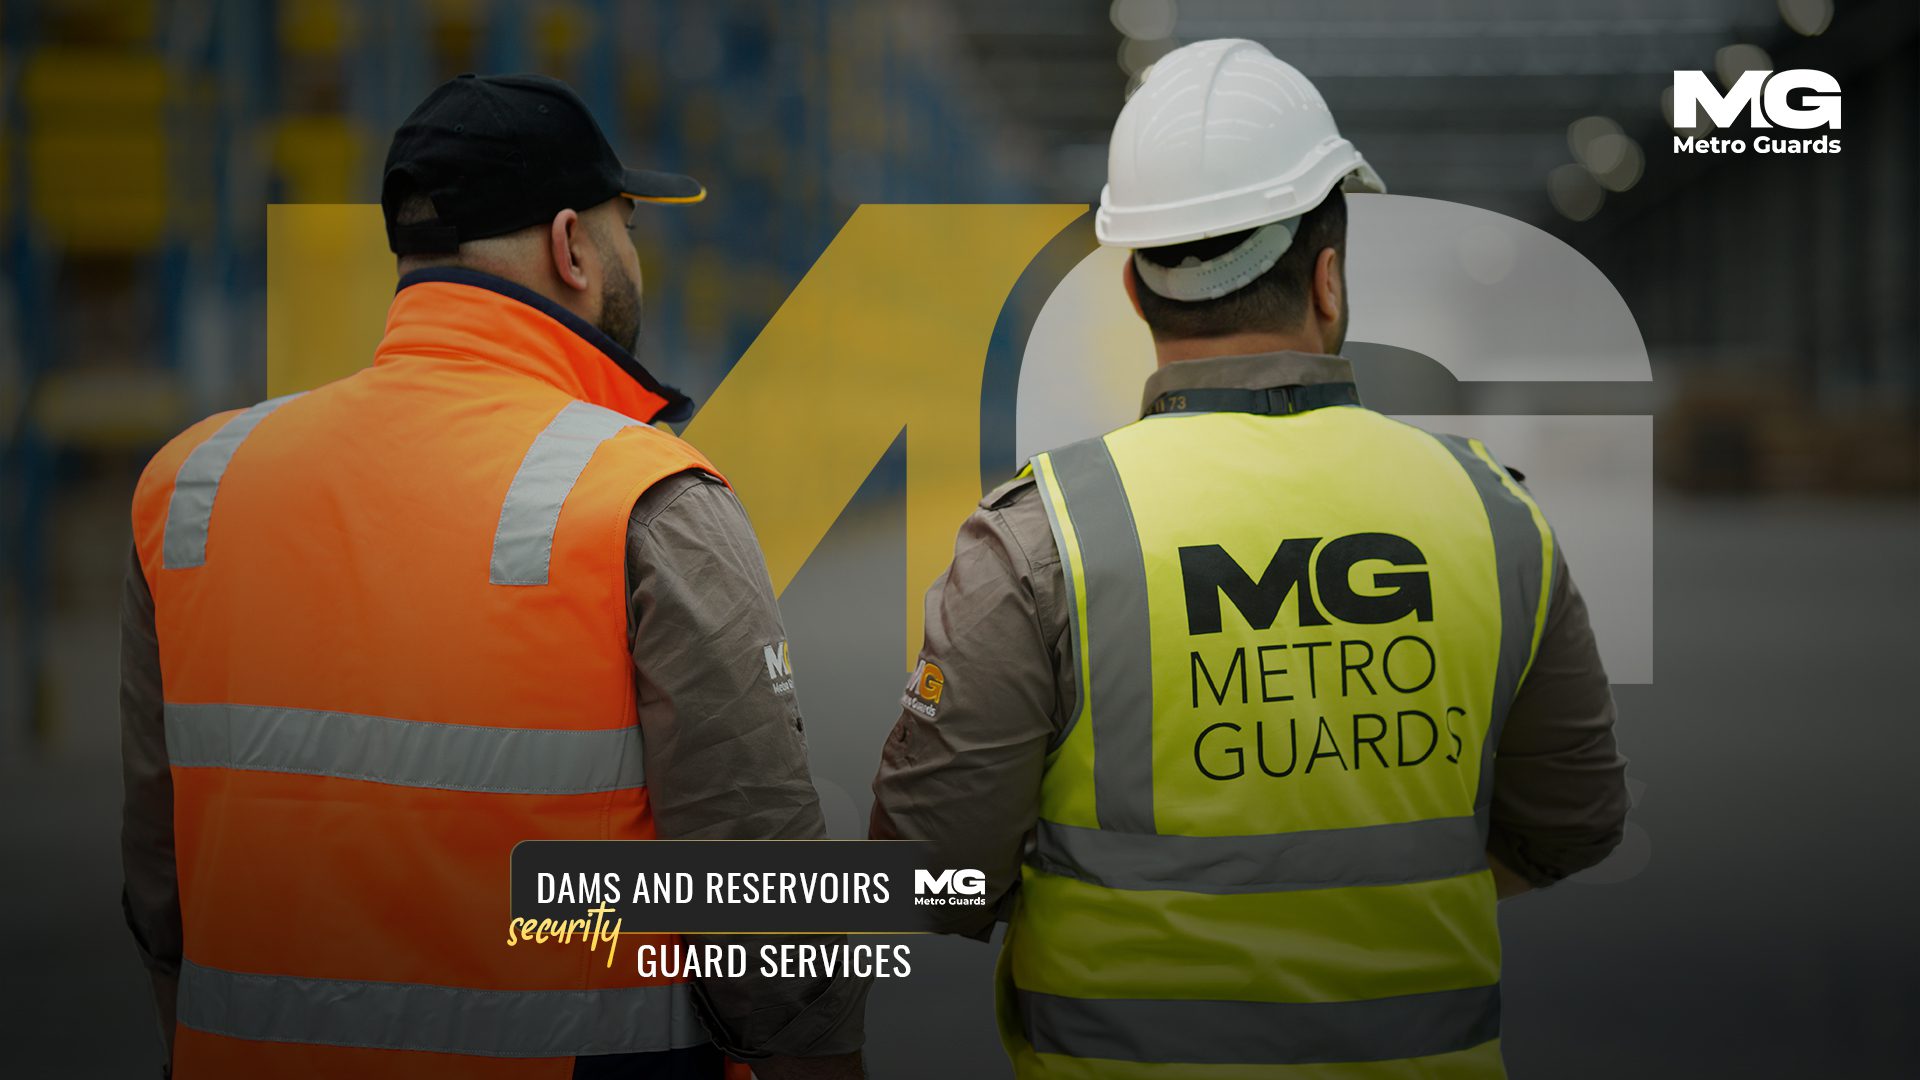 Dams and reservoirs security guard Services